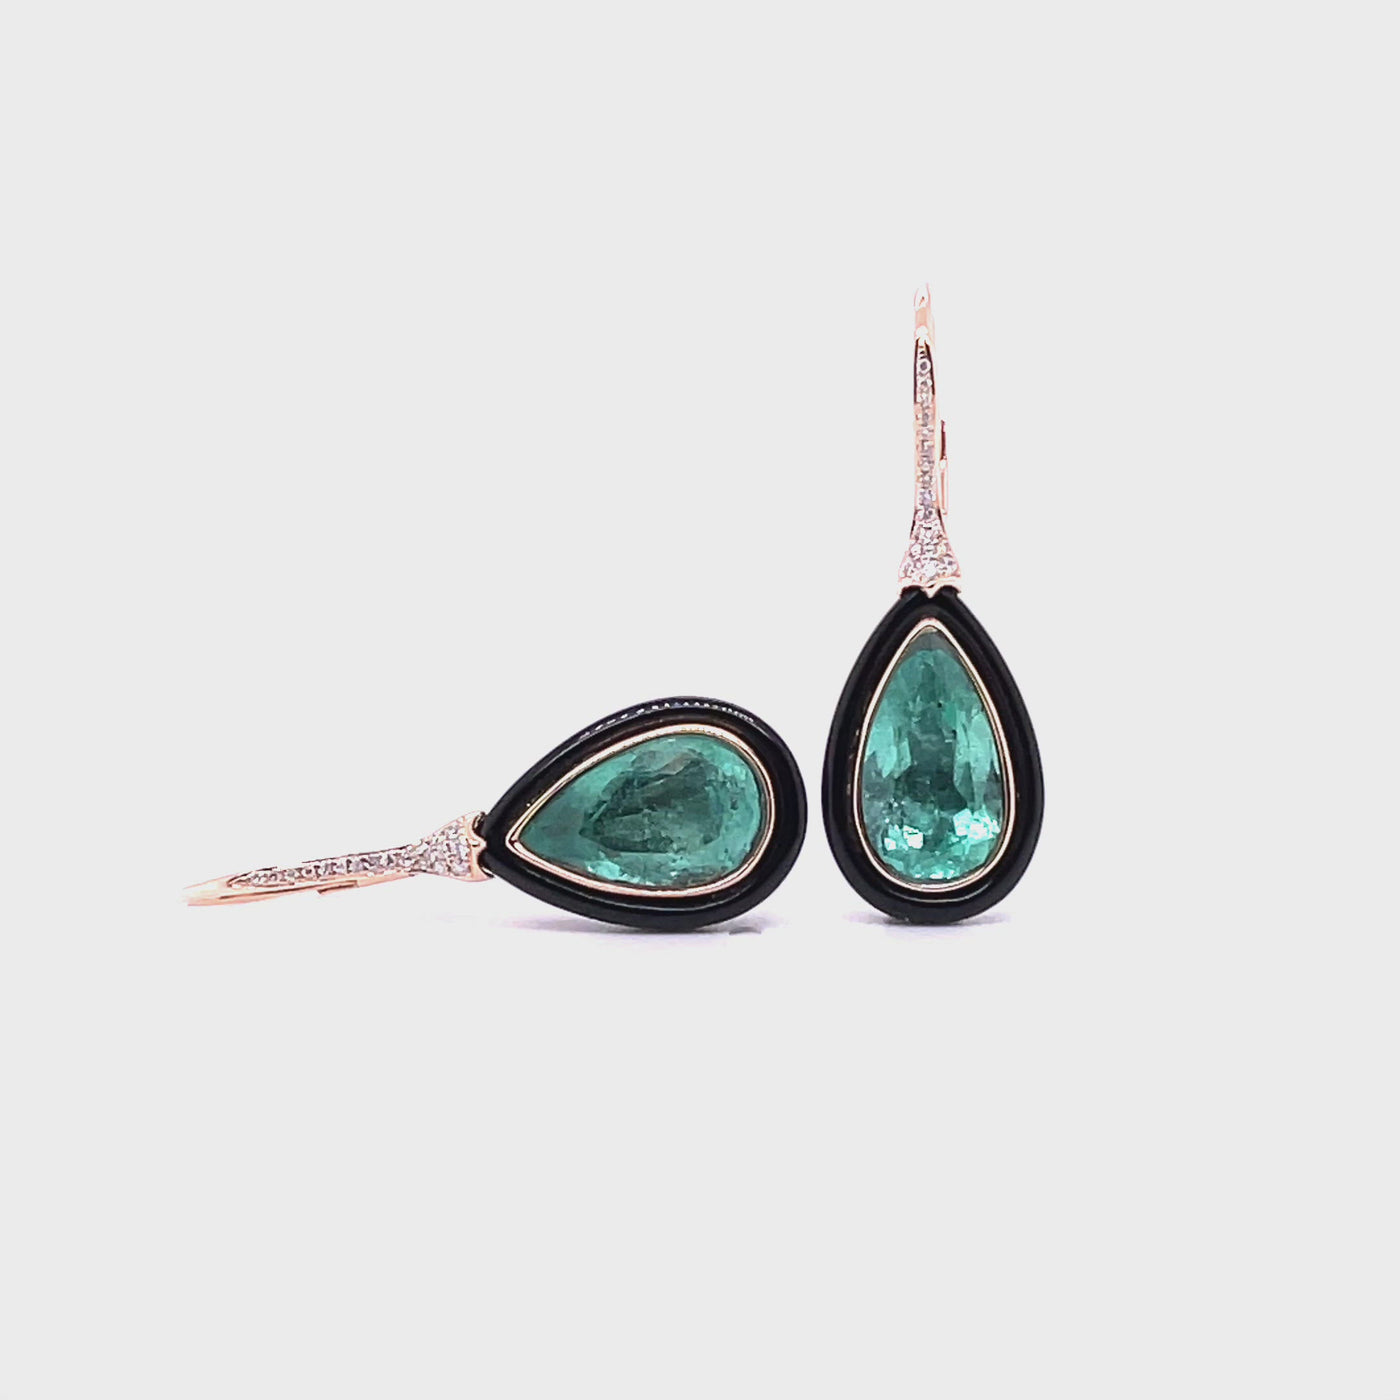 18CT rose gold colombian emerald, onyx and diamond earrings